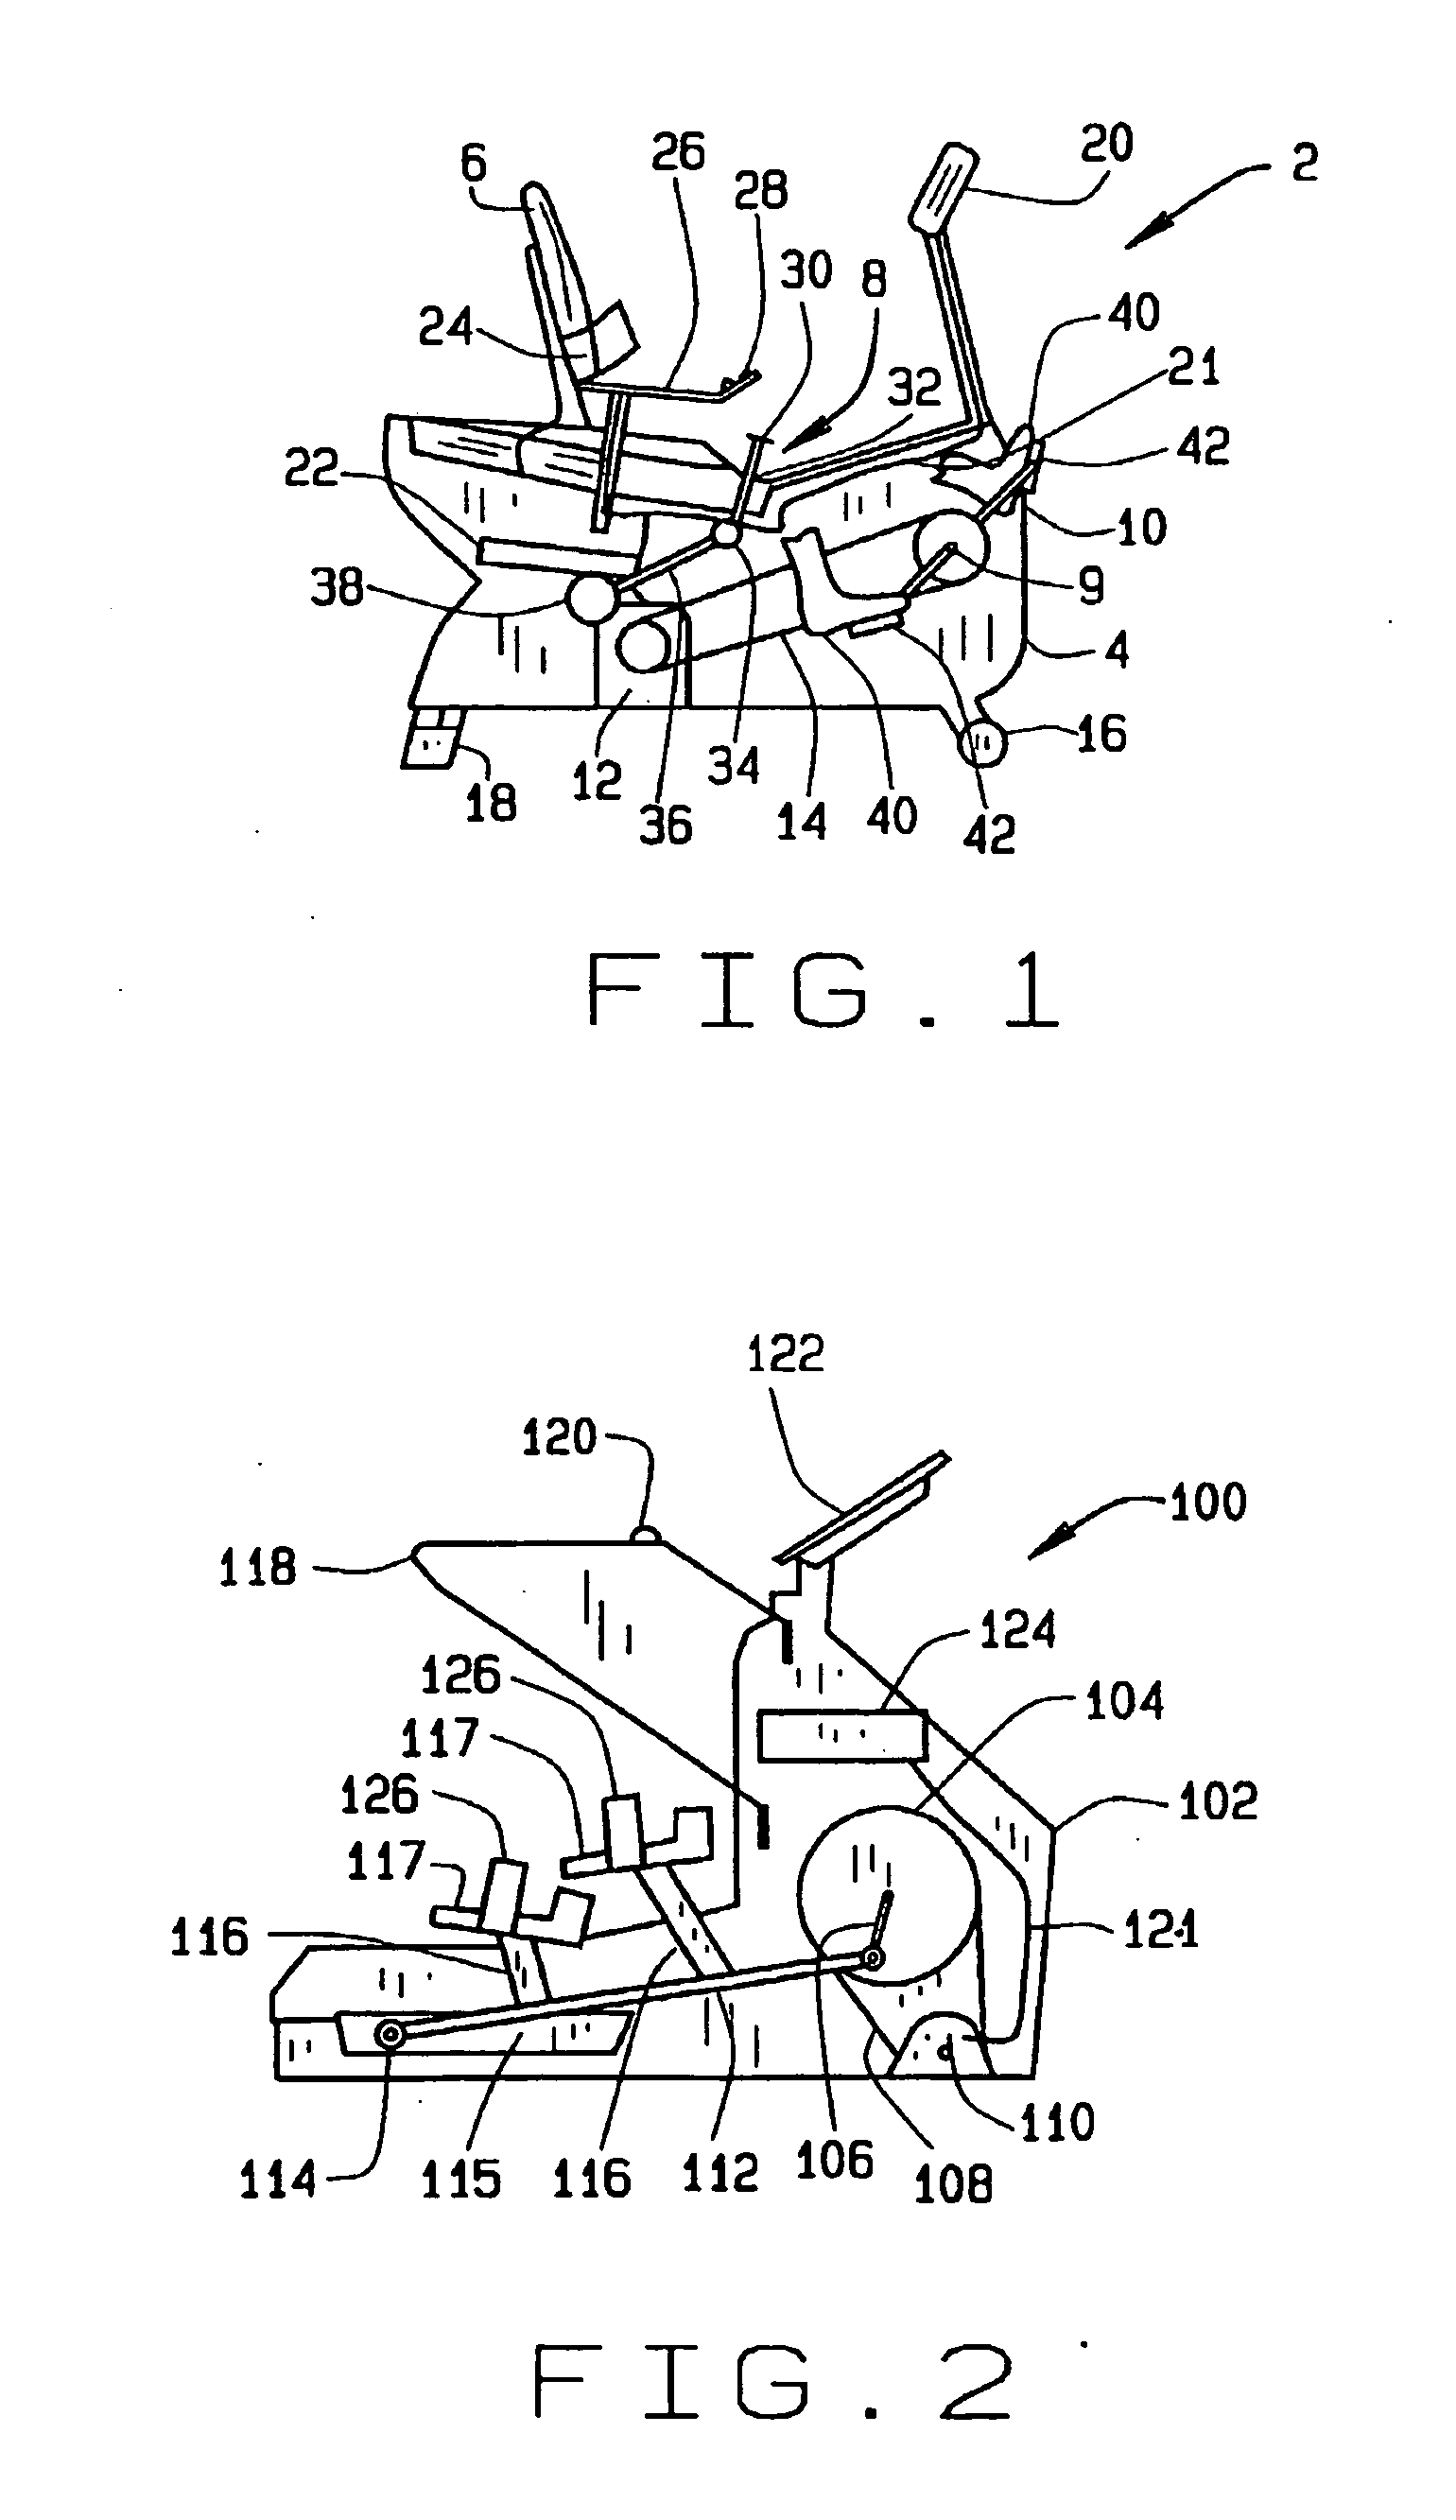 Method and apparatus for promoting nerve regeneration in paralyzed patients